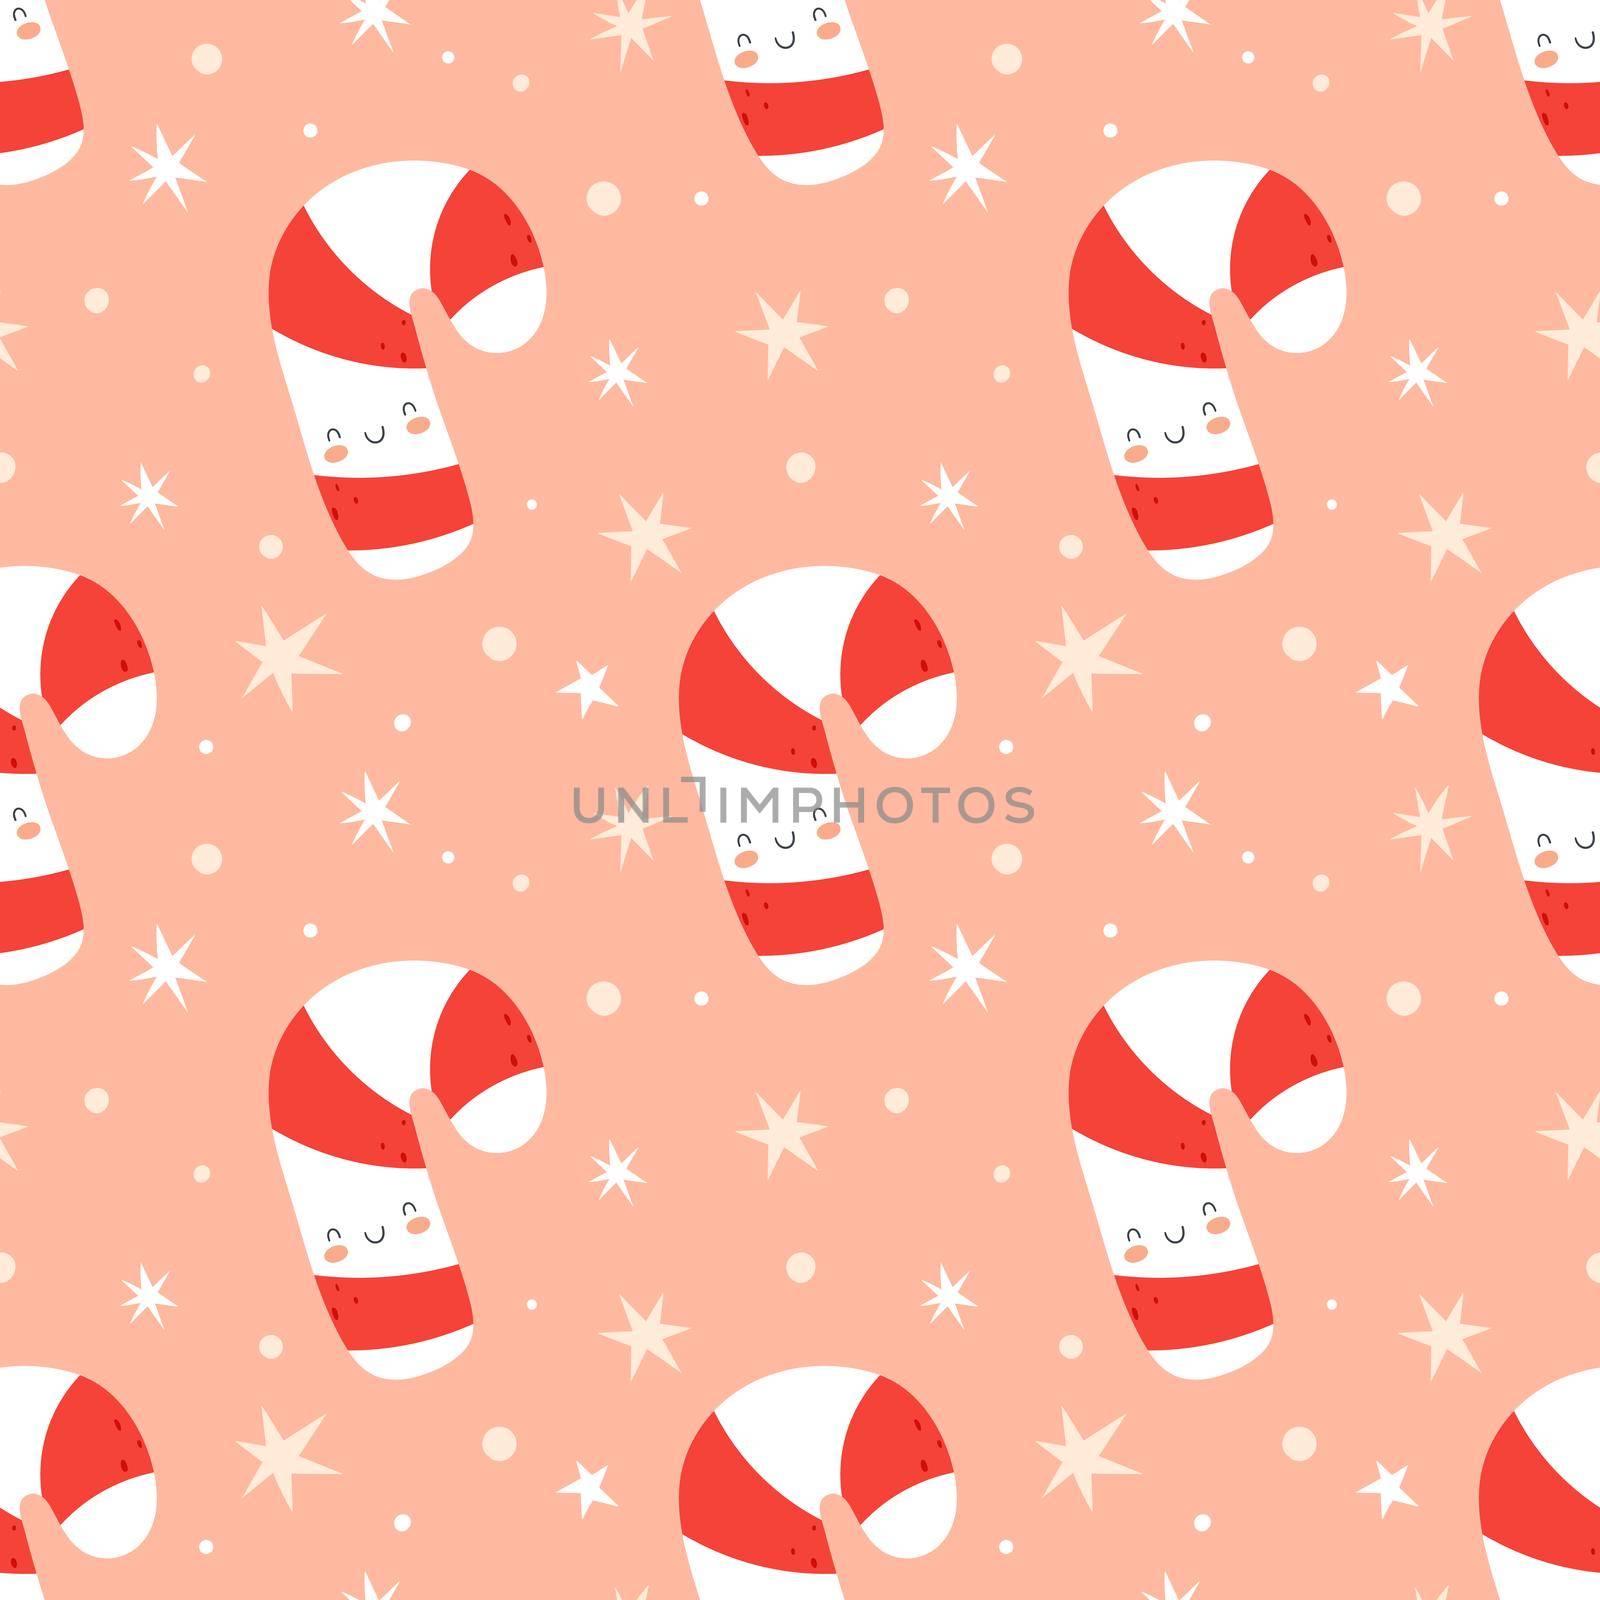 Seamless Christmas background with cute candy cane. Vector illustration in flat cartoon style on a pink background. Ideal for fabric and wrapping paper.